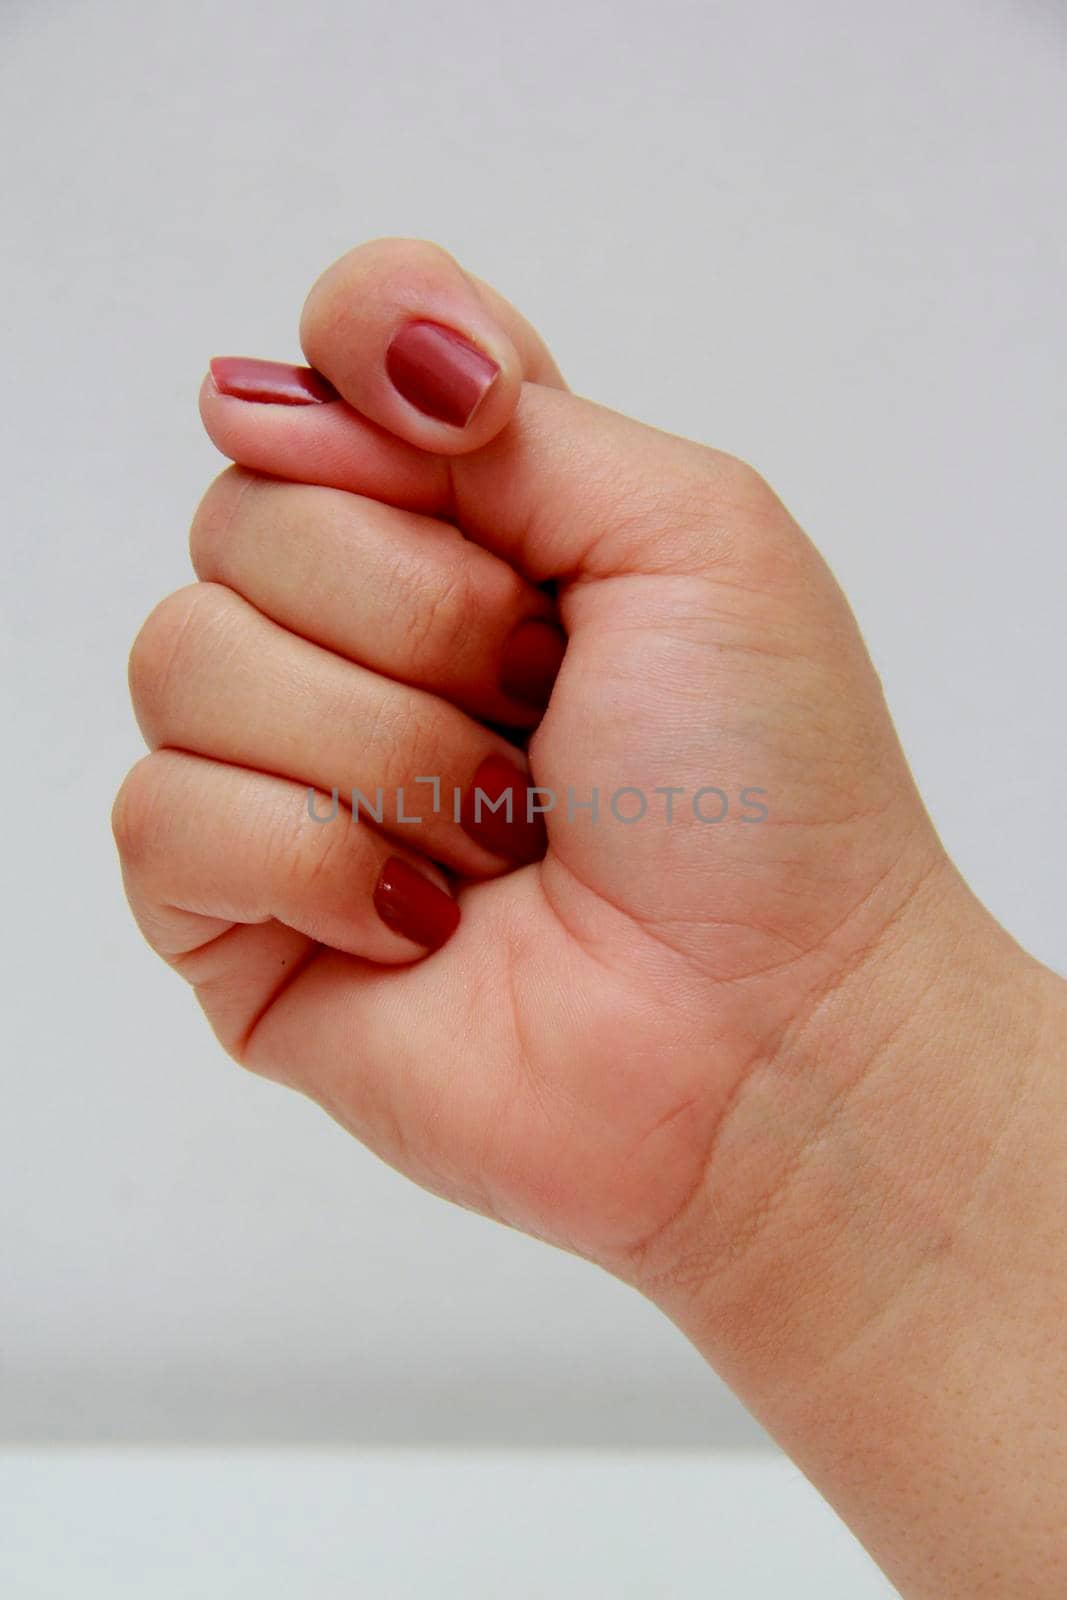 salvador, bahia / brazil - november 10, 2013: woman's hand closed in the shape of a fig.

